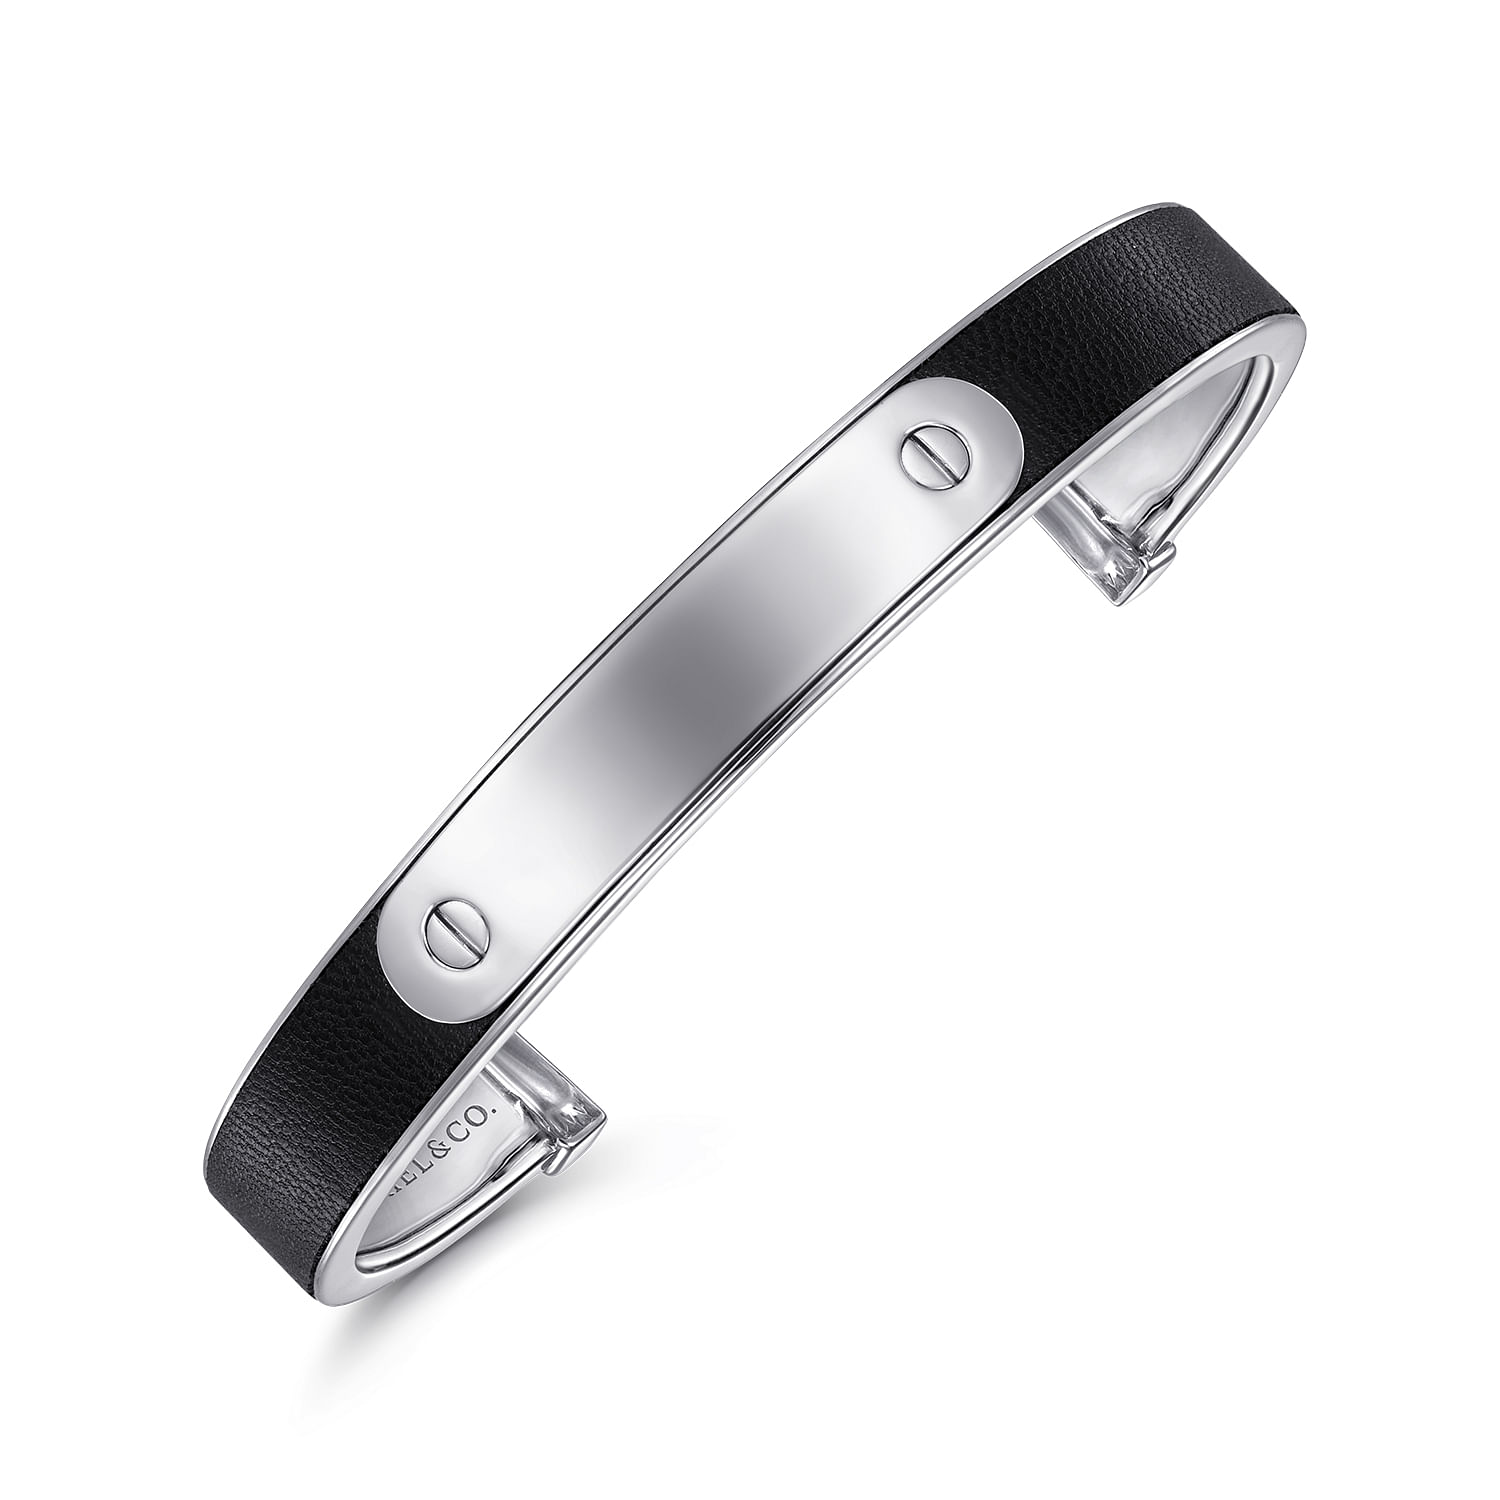 925 Sterling Silver and Leather ID Cuff Bracelet